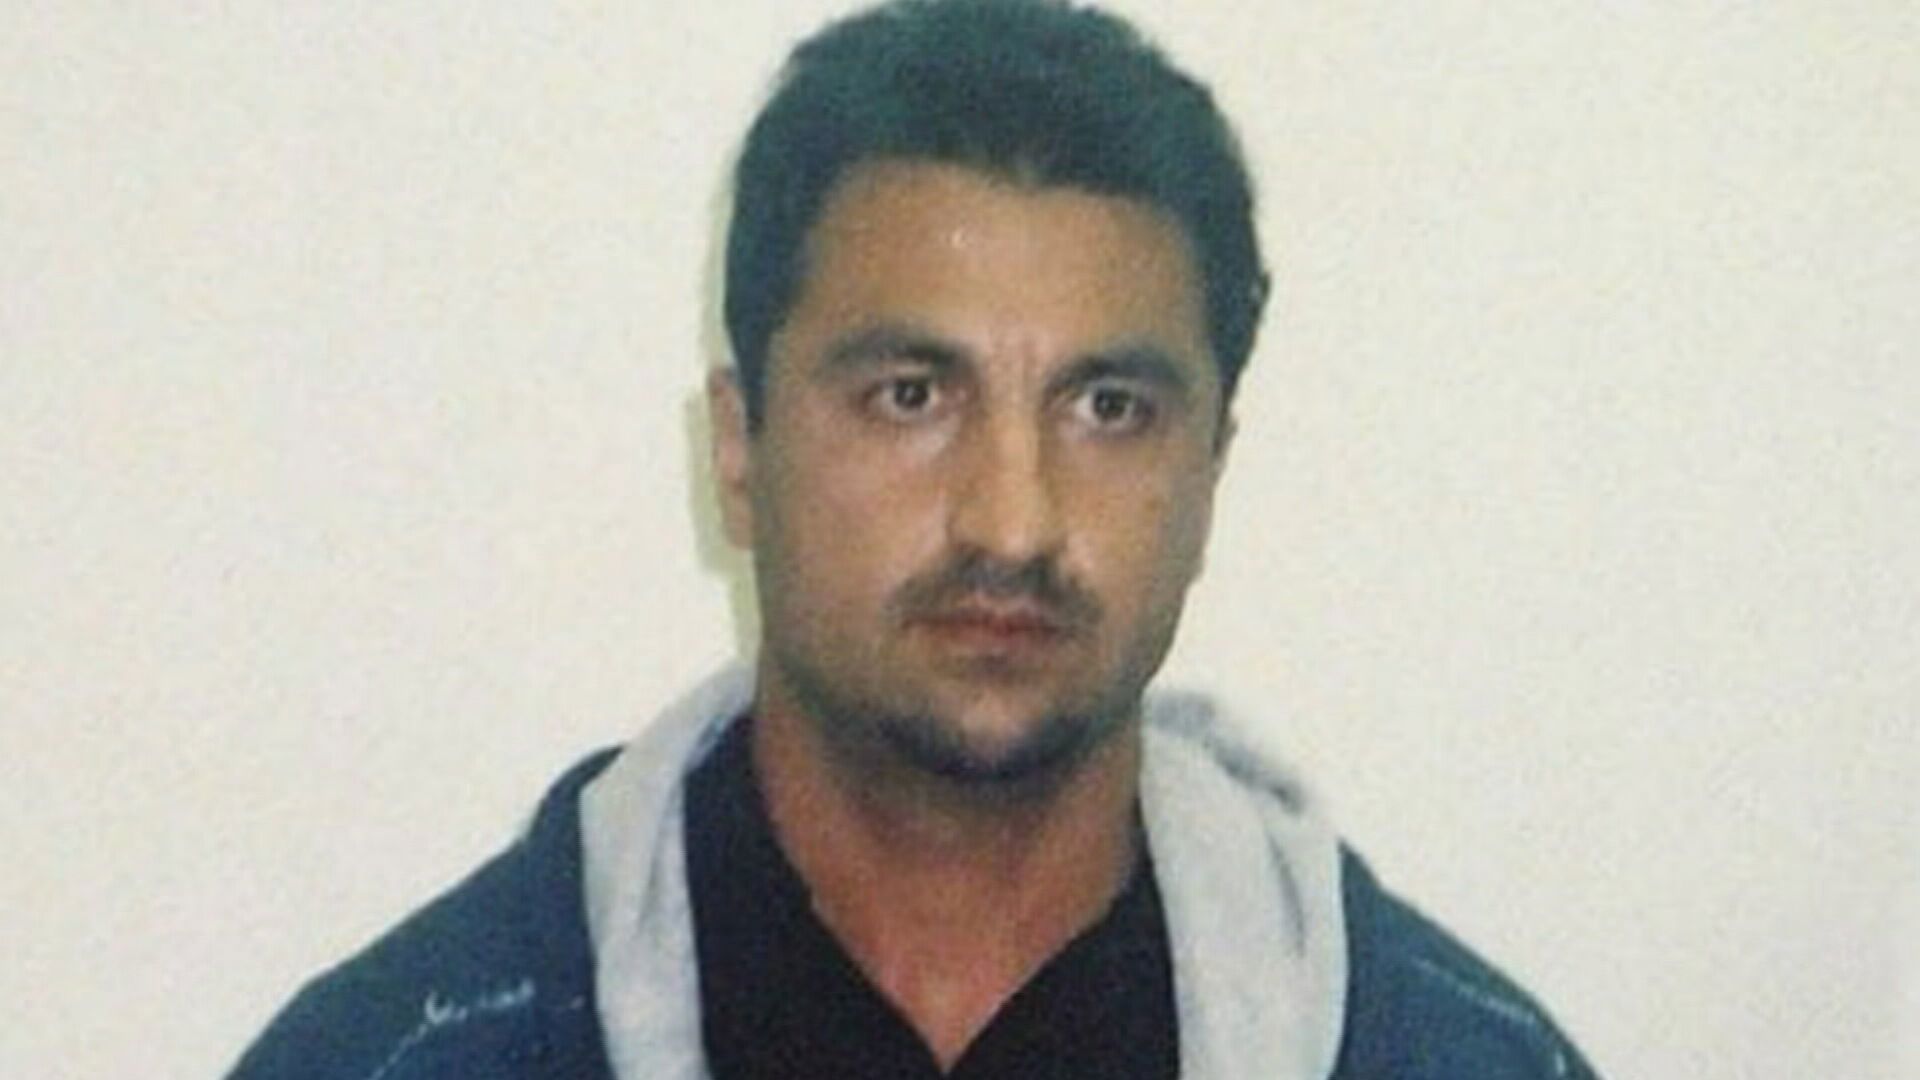 A 53-year-old man who was shot dead while walking along a Melbourne street near a popular nightlife area was associated with organised crime, police have revealed.The shooting on Almeida Crescent in South Yarra about 11.40pm yesterday was a "targeted attack" on notorious Mongol bikie Mohammed Akbar Keshtiar, who lived in the suburb.